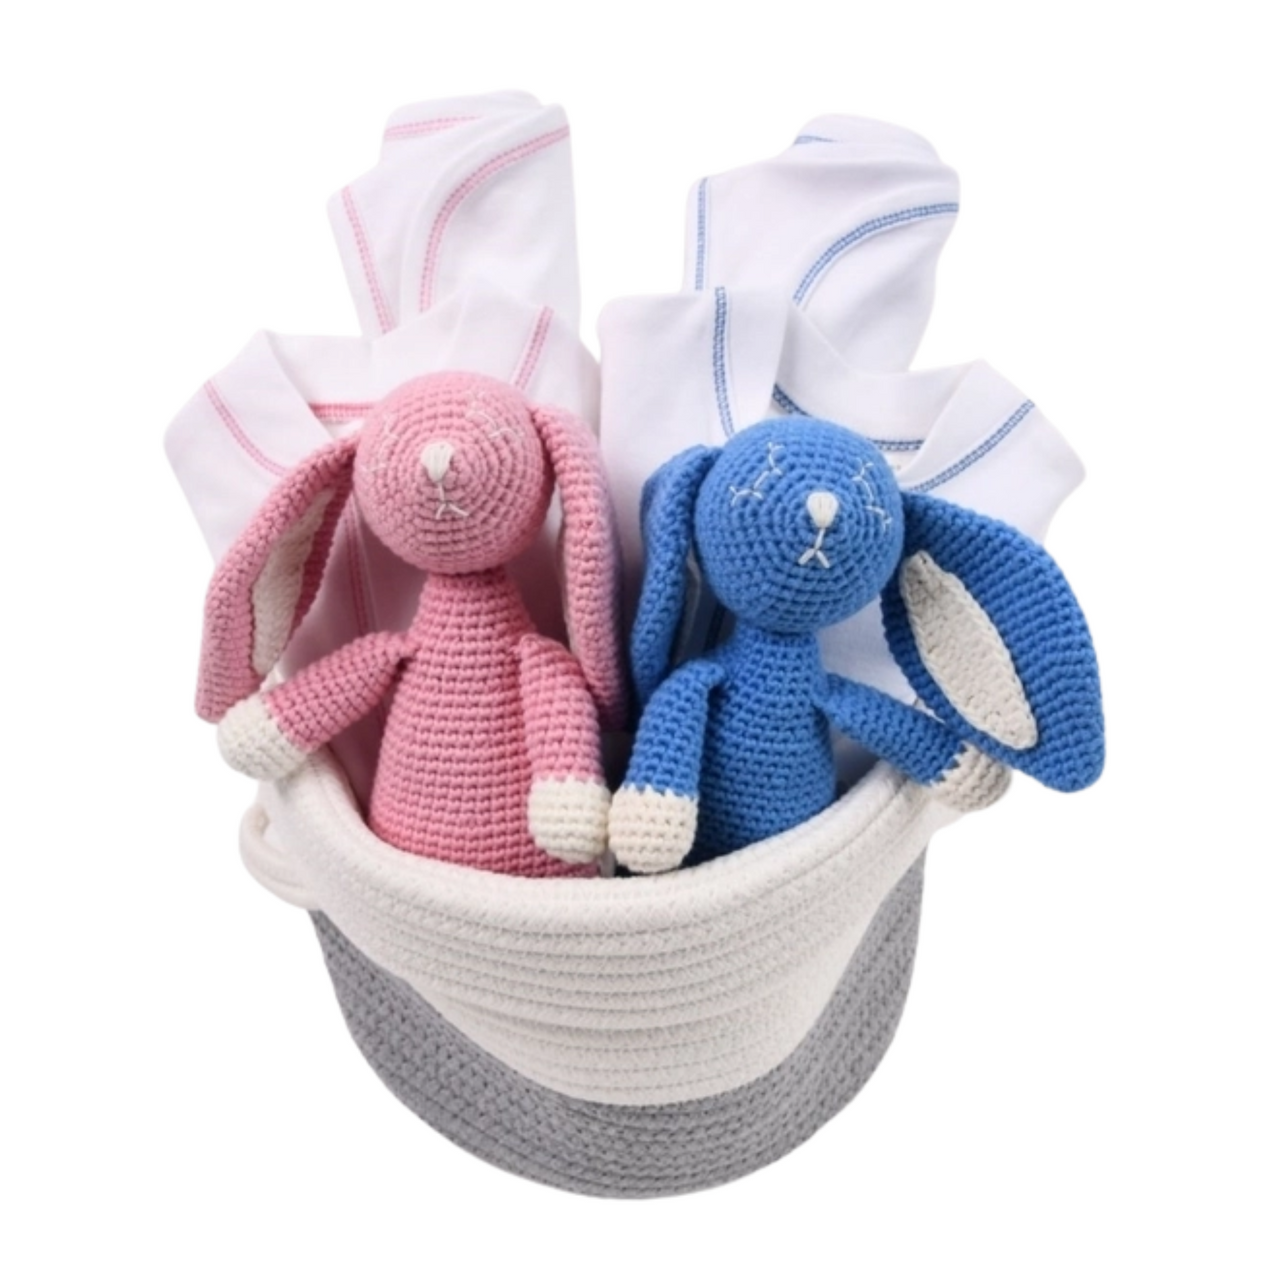 Organic Twin Baby Gifts - Pink & Blue